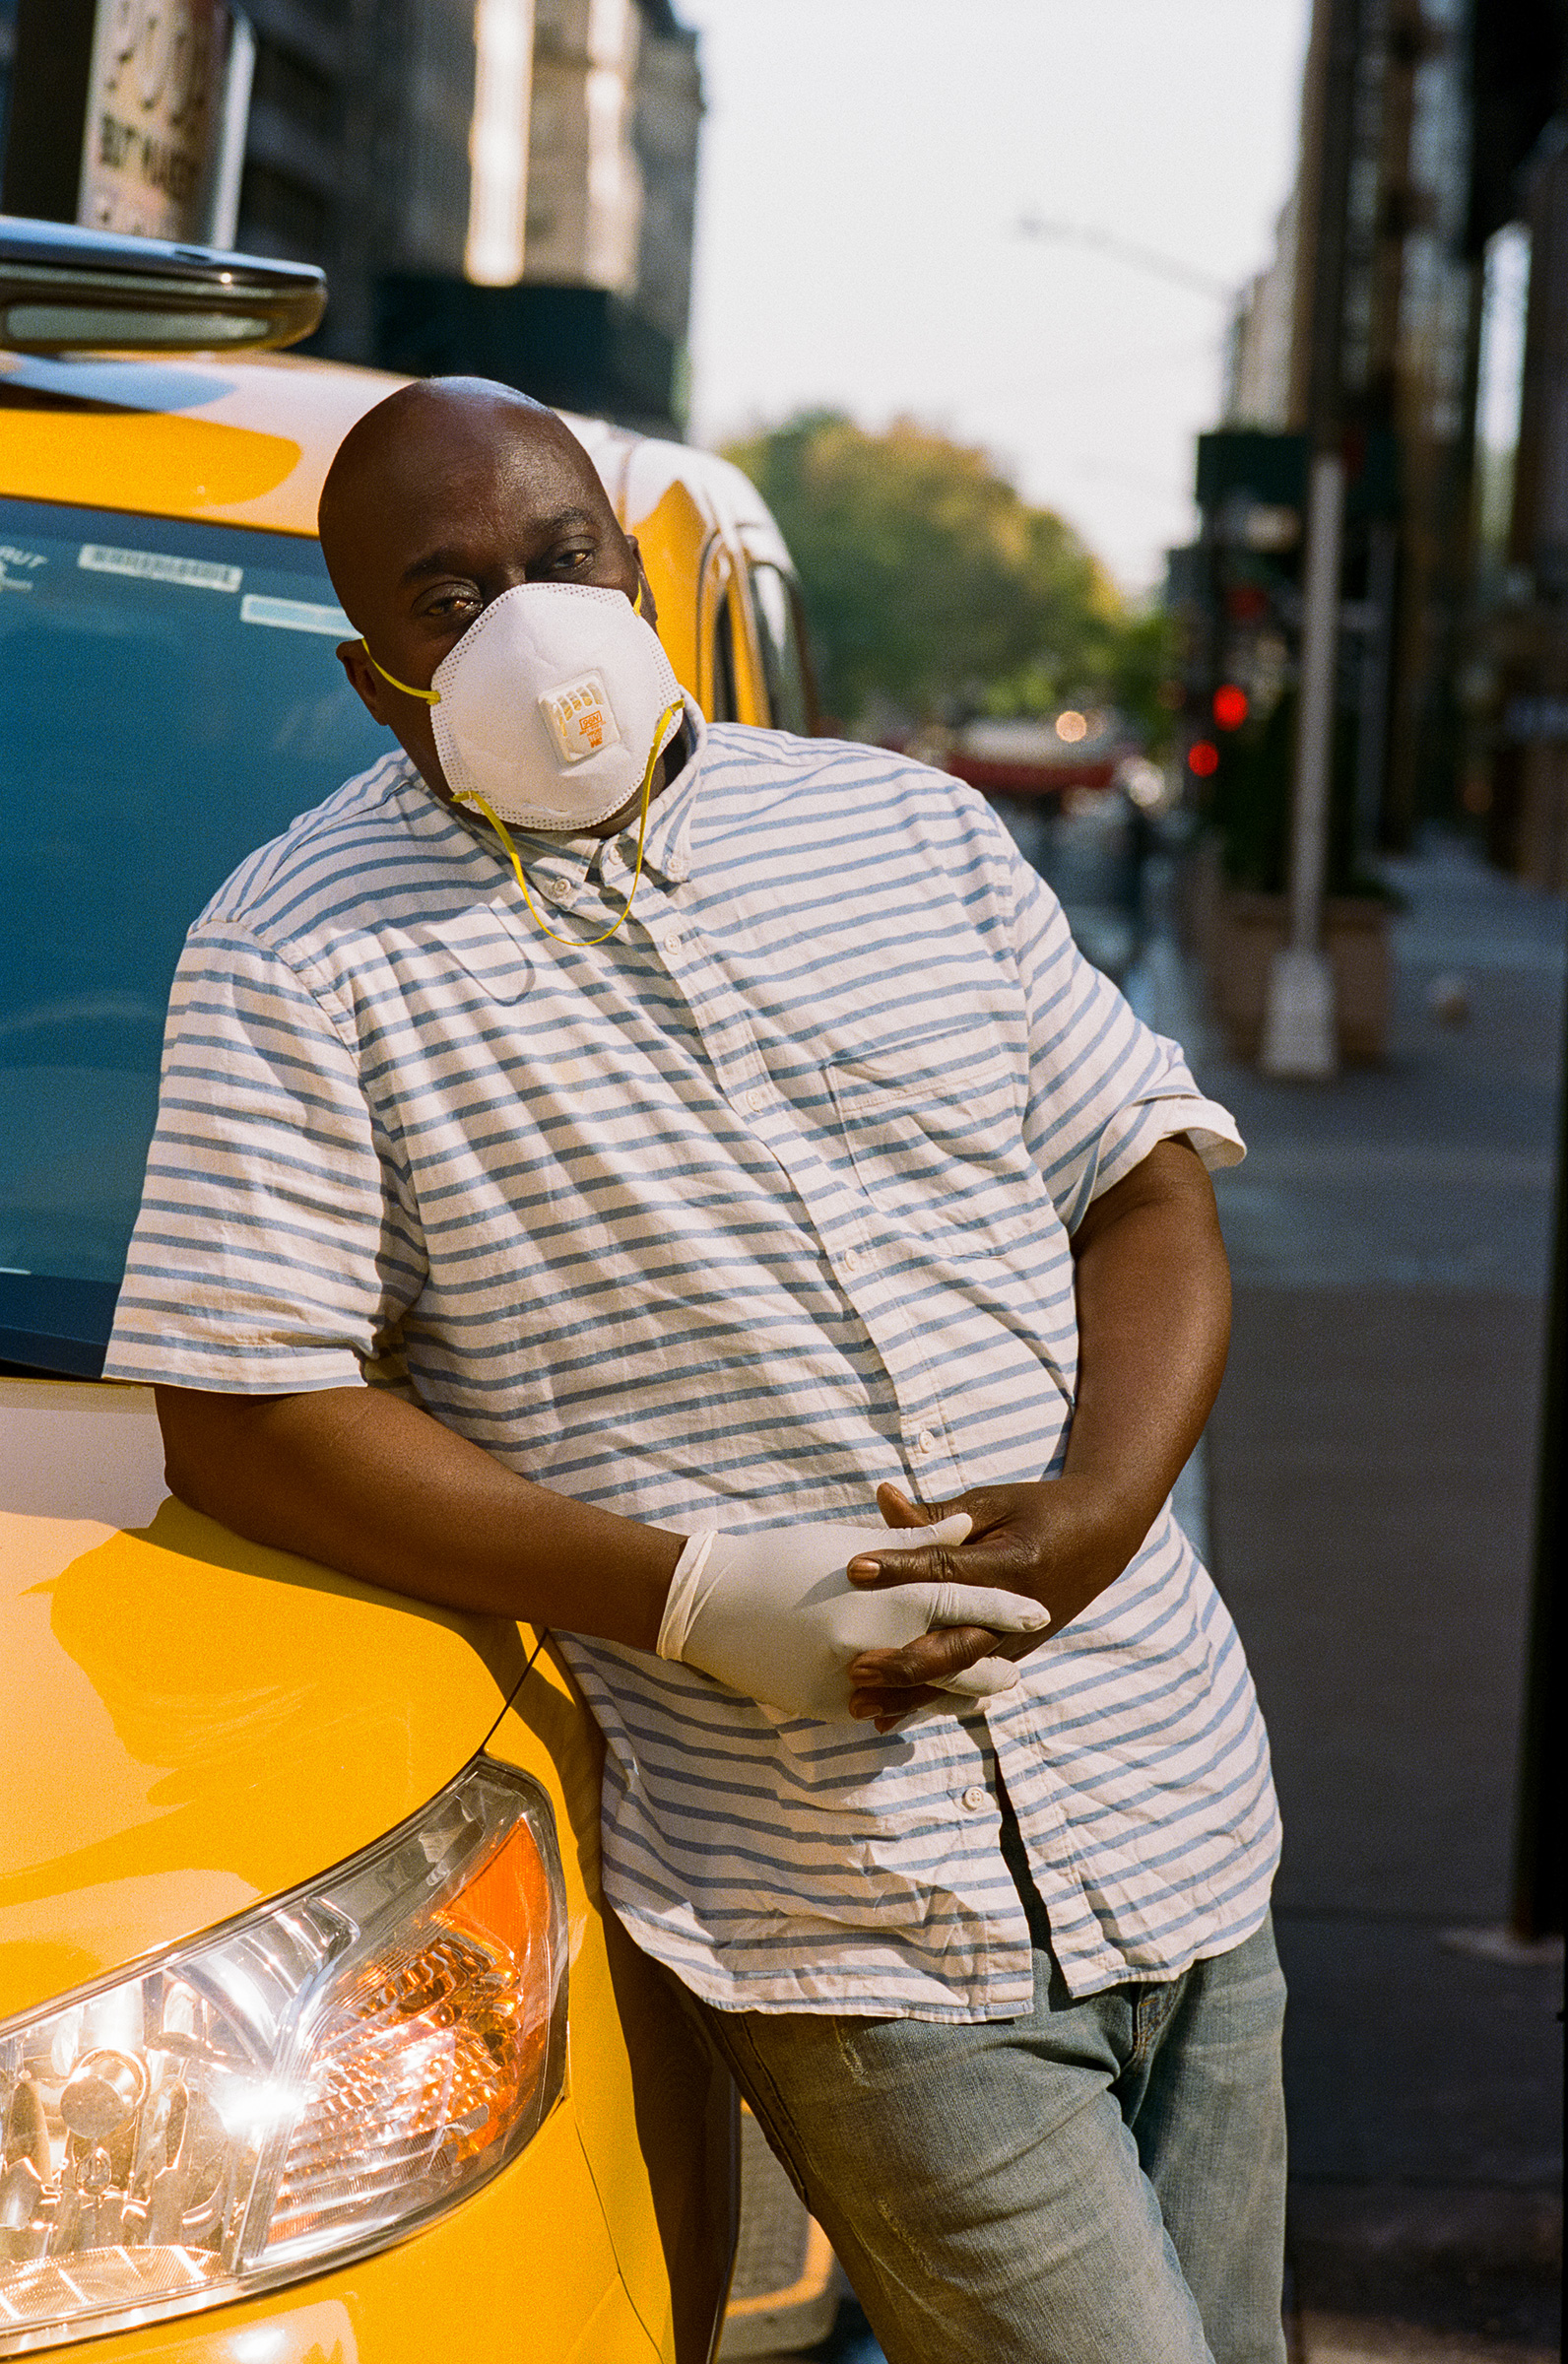 Taxi drivers, like Jacob Smith, pick up many passengers from hospitals and have to buy their own face masks, sanitizers and gloves. "I’m more cautious," Smith says. (Andre D. Wagner for TIME)